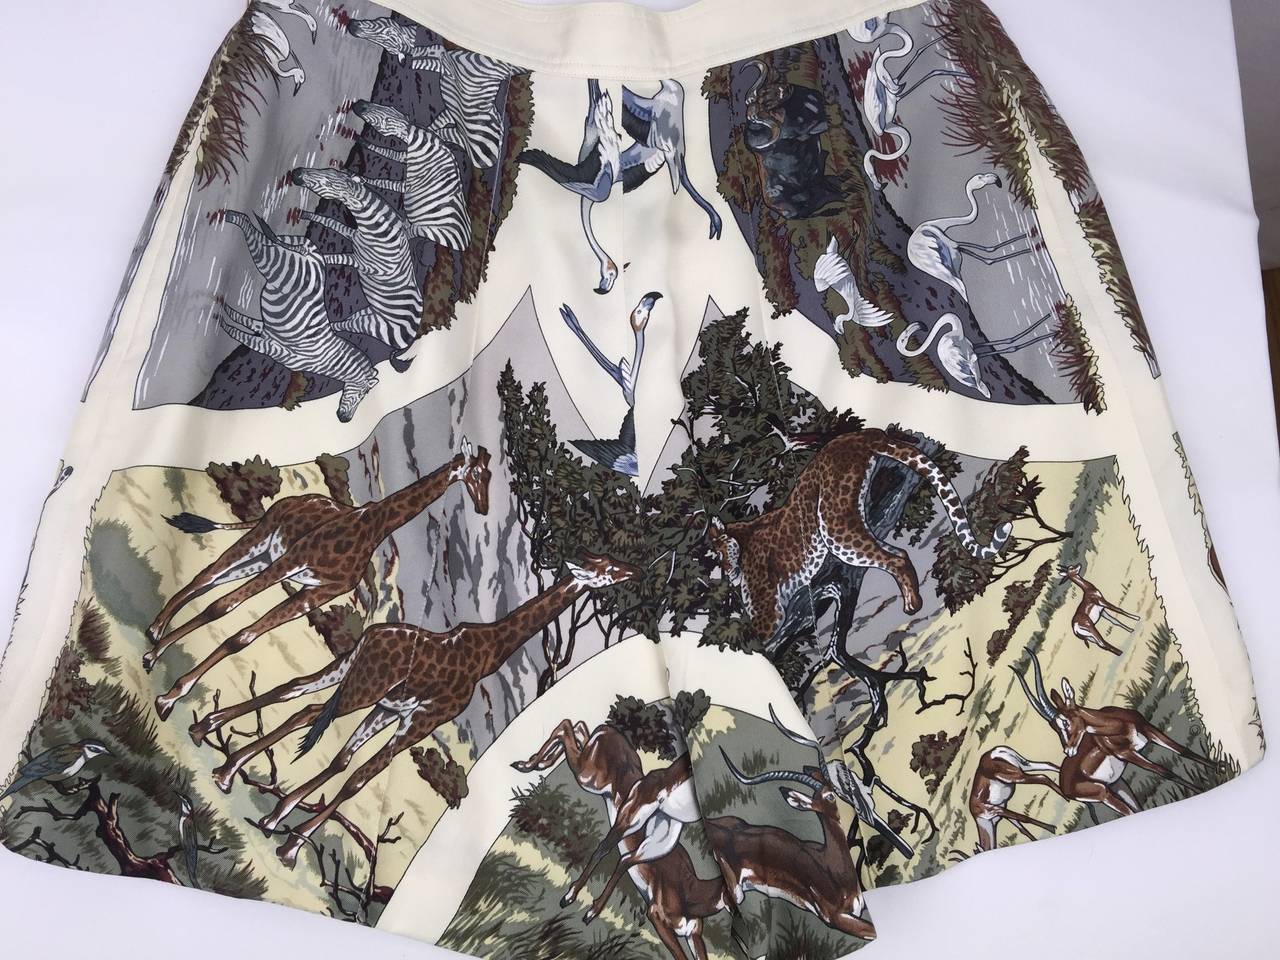 Rare and special vintage jungle themed safari style silk shorts by Hermes.  
Amazingly rich detail of exotic flora and fauna in classic understated tones on ivory background. 
Slightly flared with two slit pockets.  Pearl buttons engraved Hermes